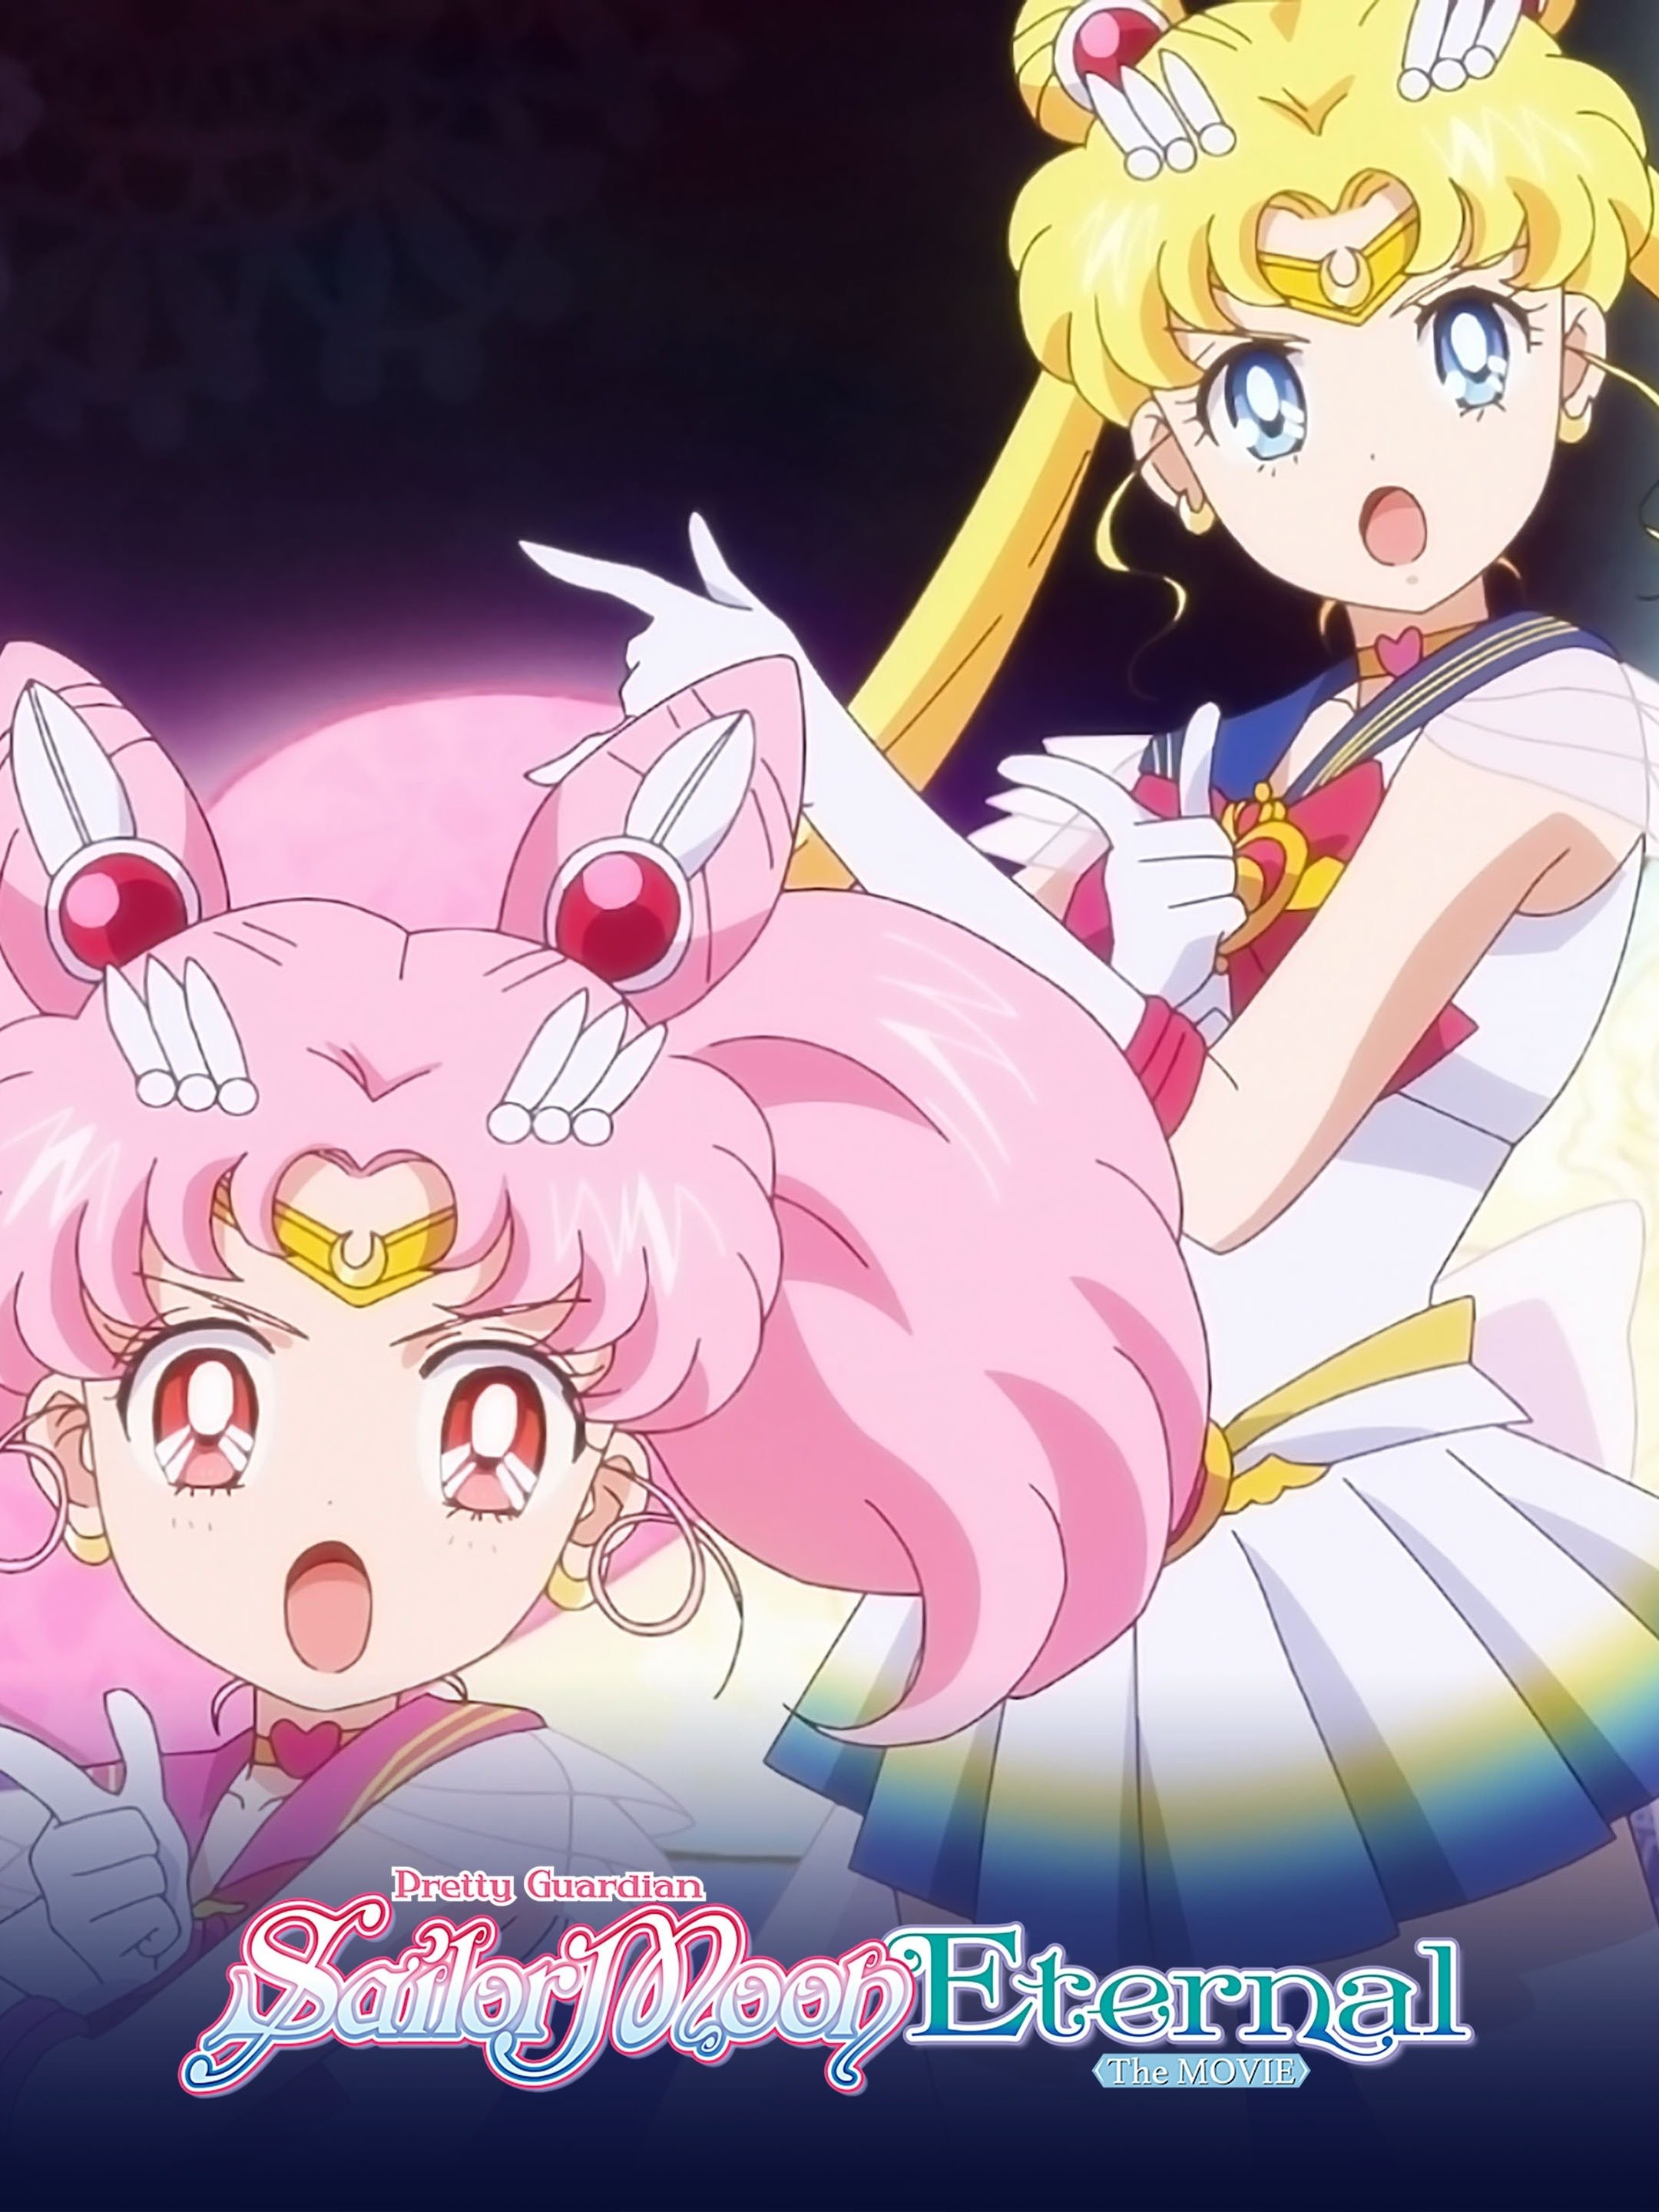 Pretty Guardian Sailor Moon Eternal the Movie will be on Netflix